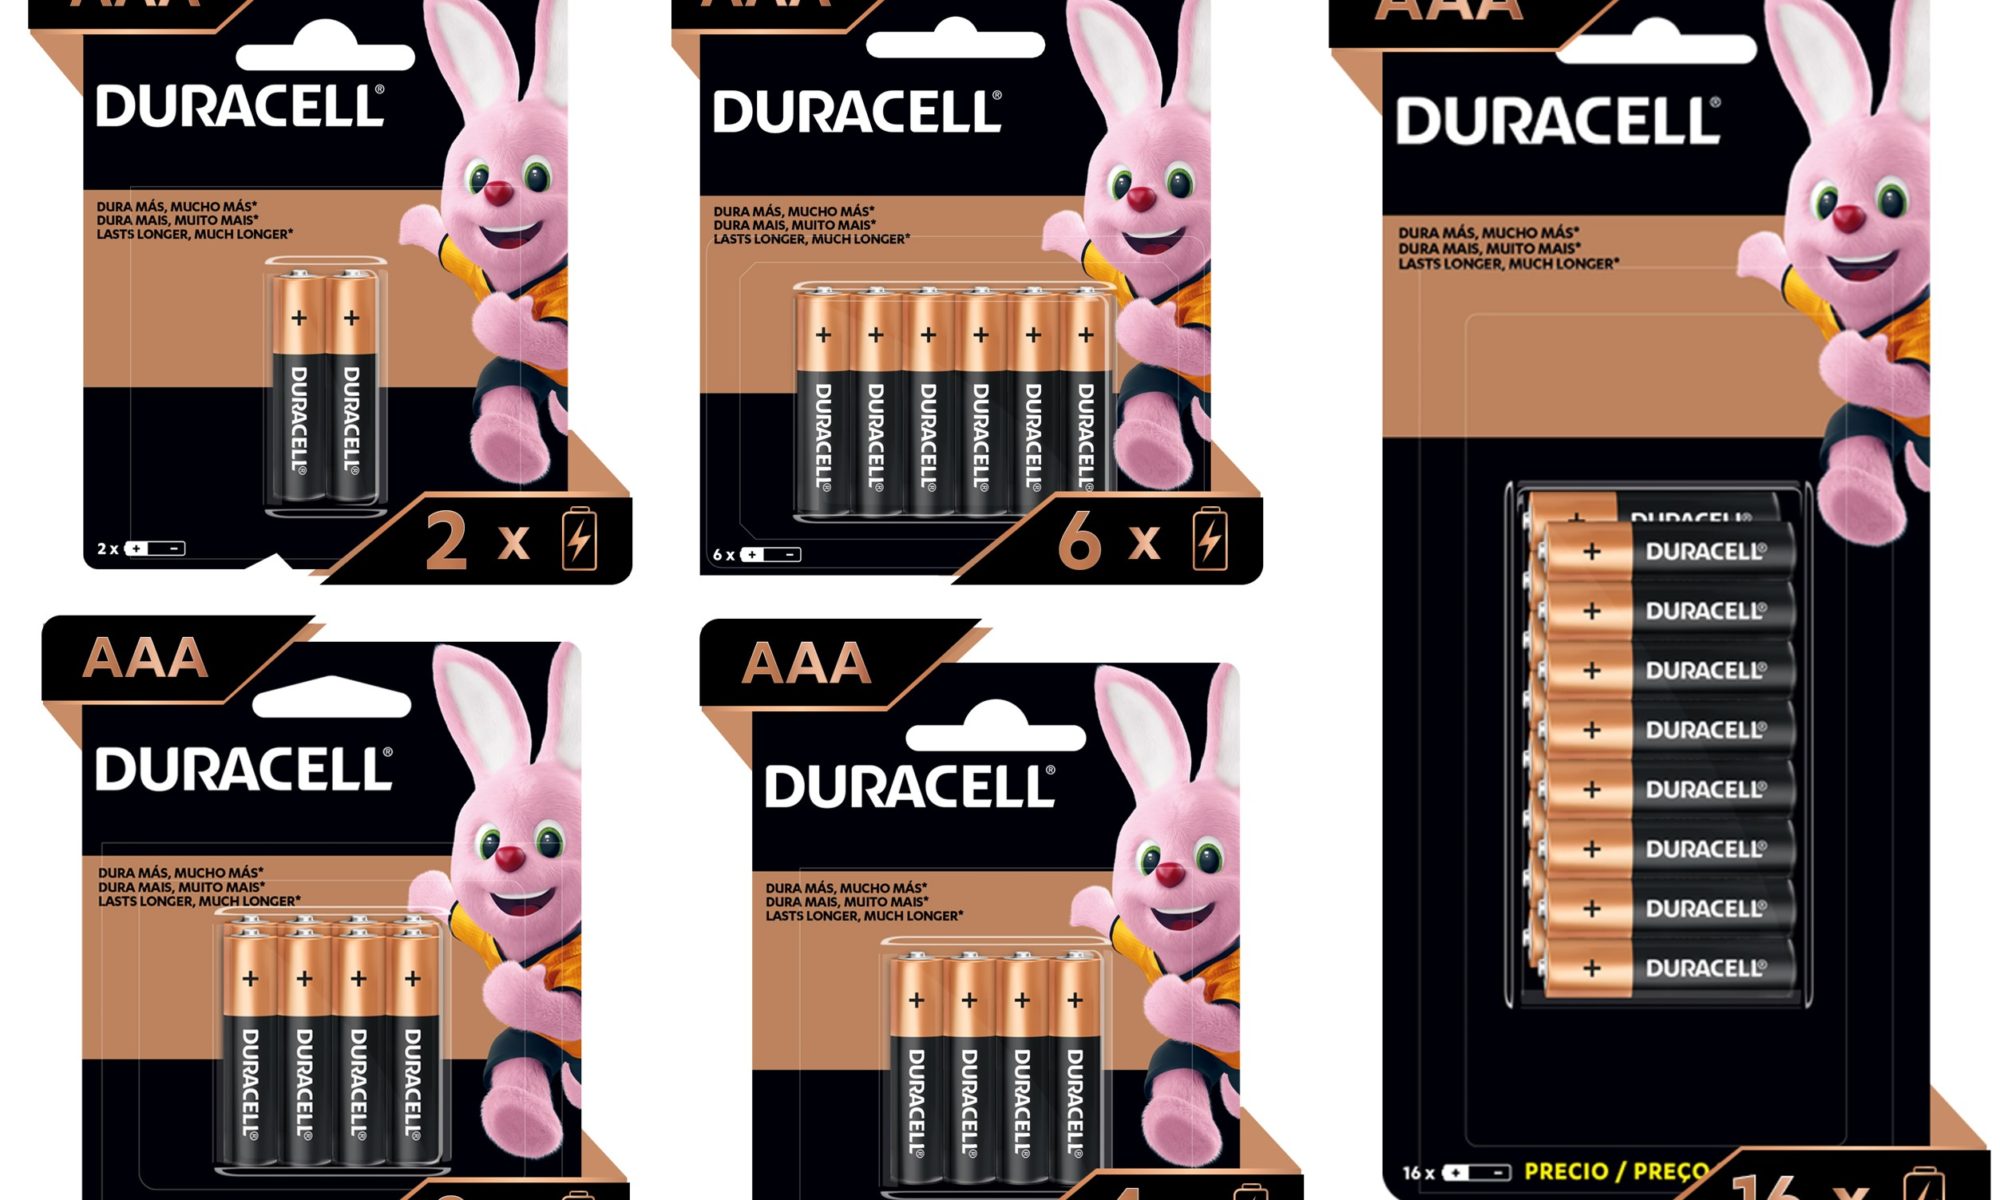 Pilas Duracell AAA x4 unidades